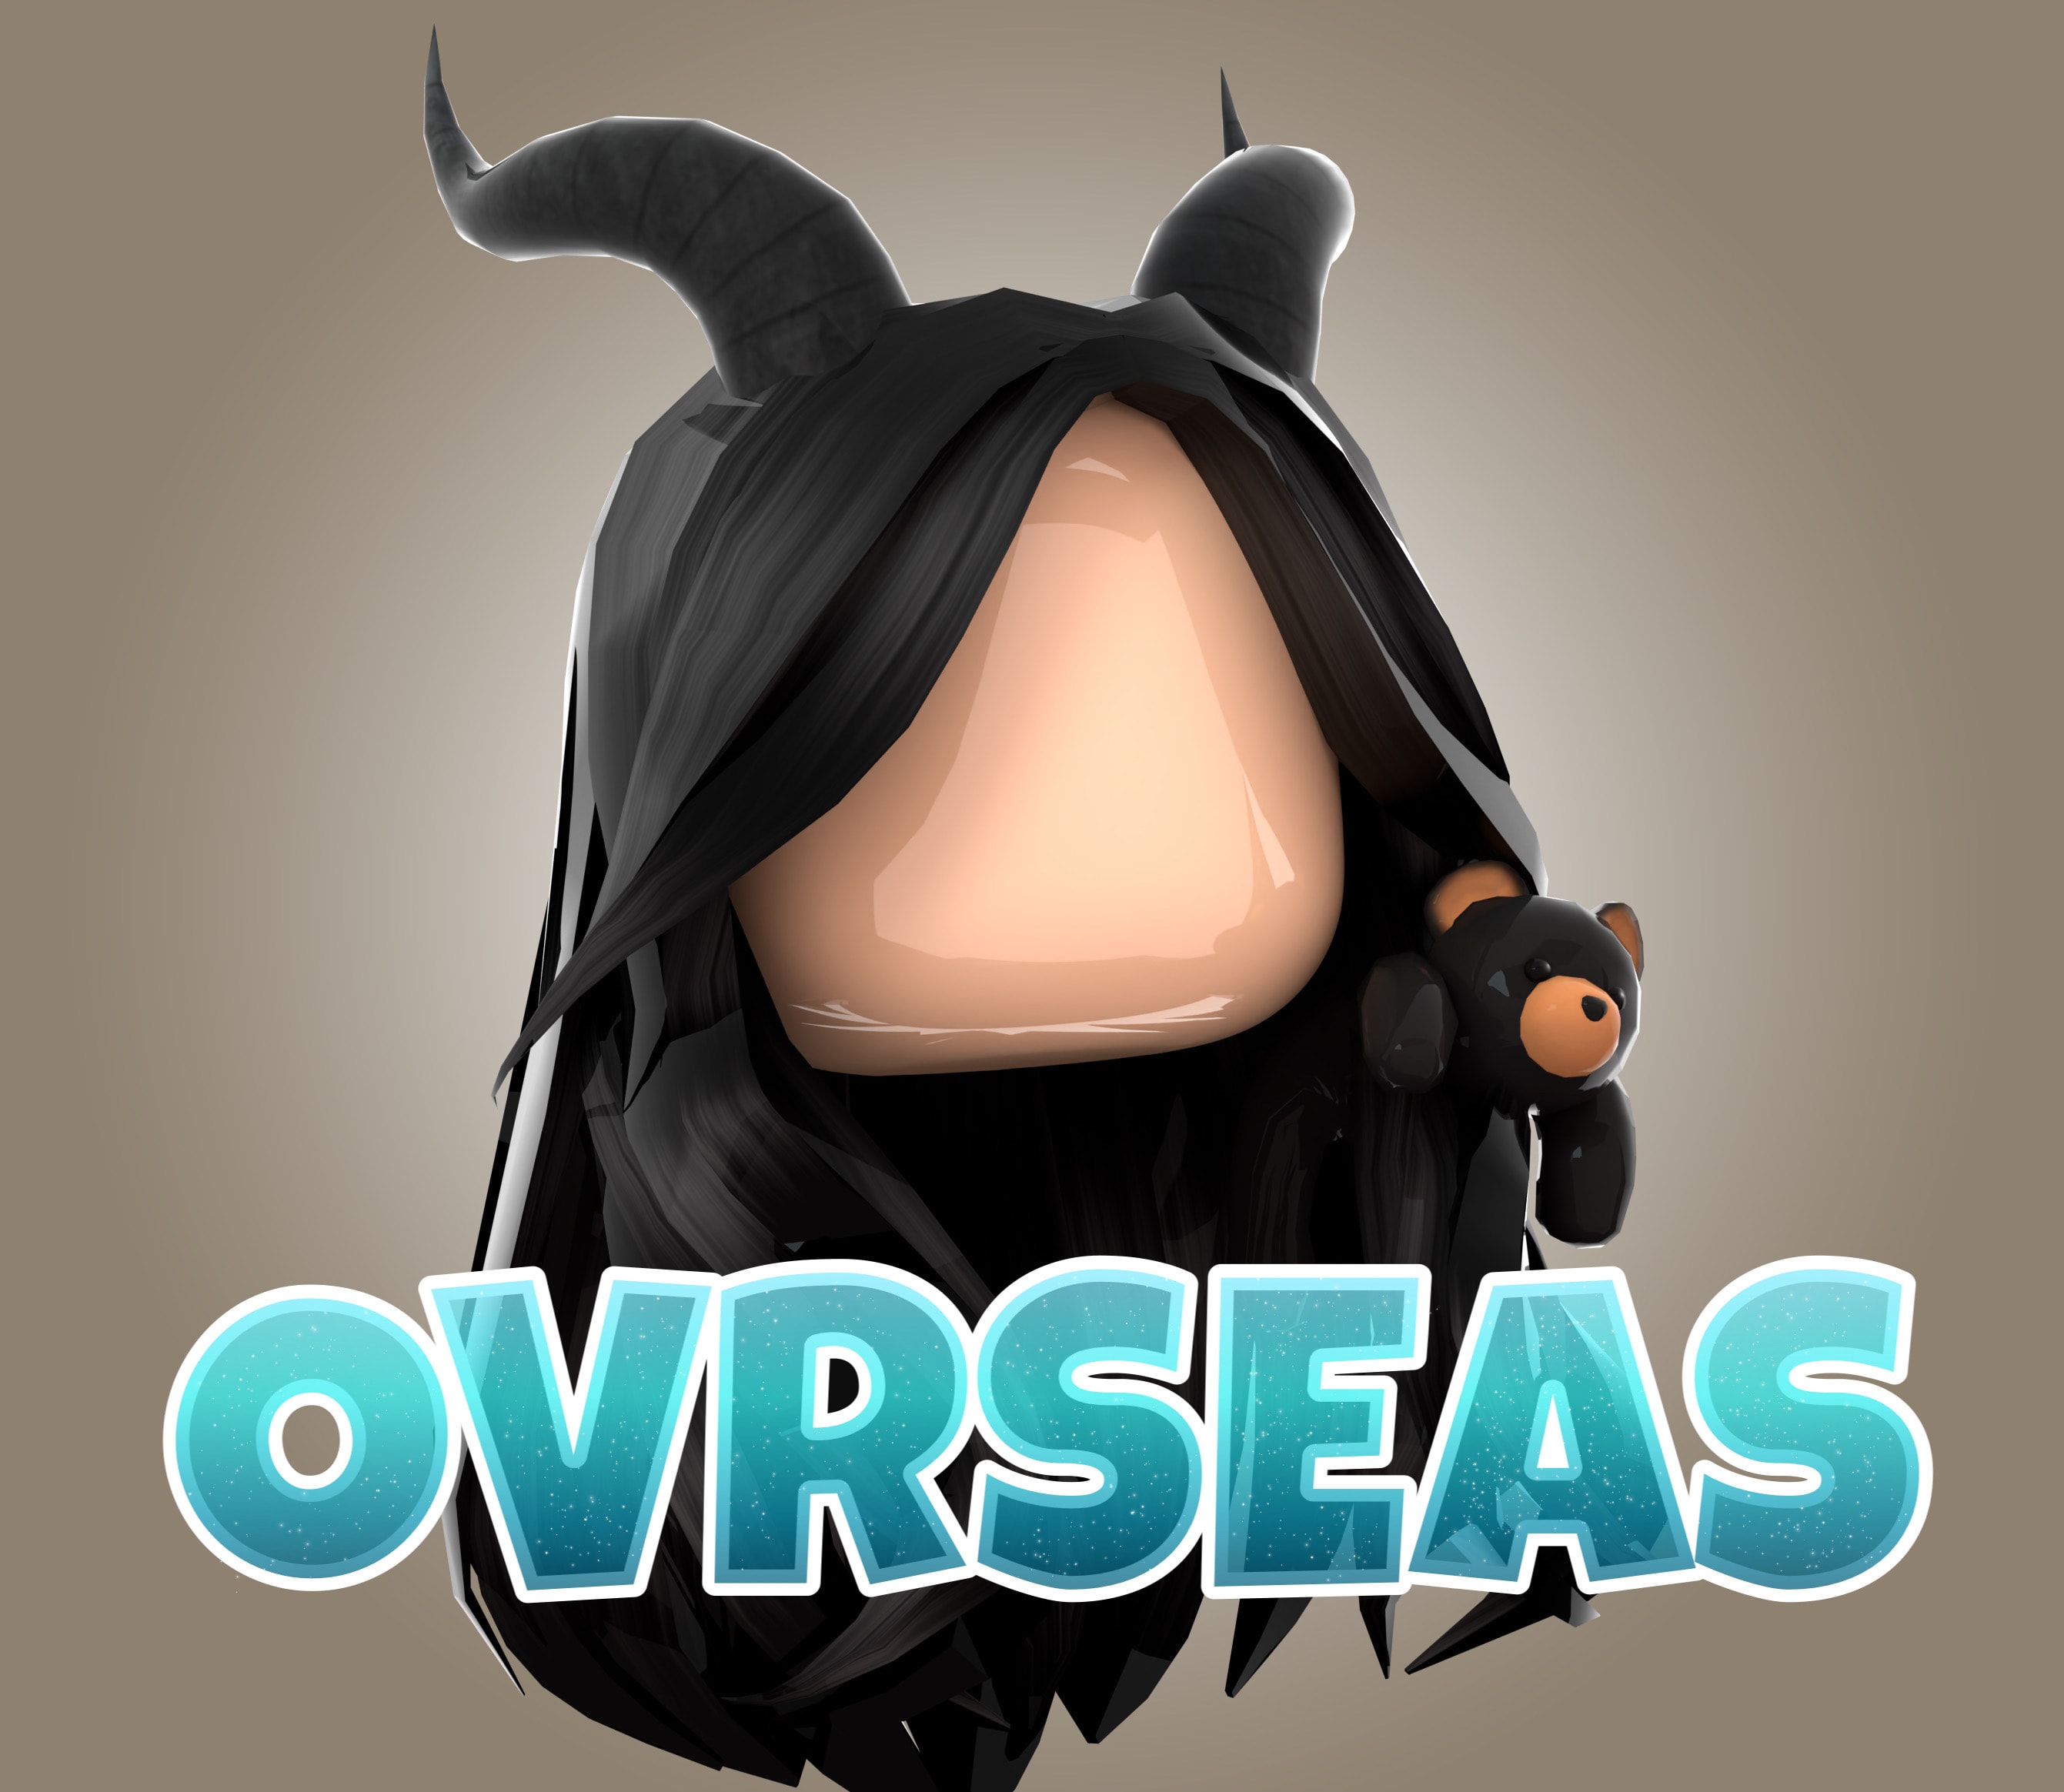 Make a roblox character head gfx by Ovrseas